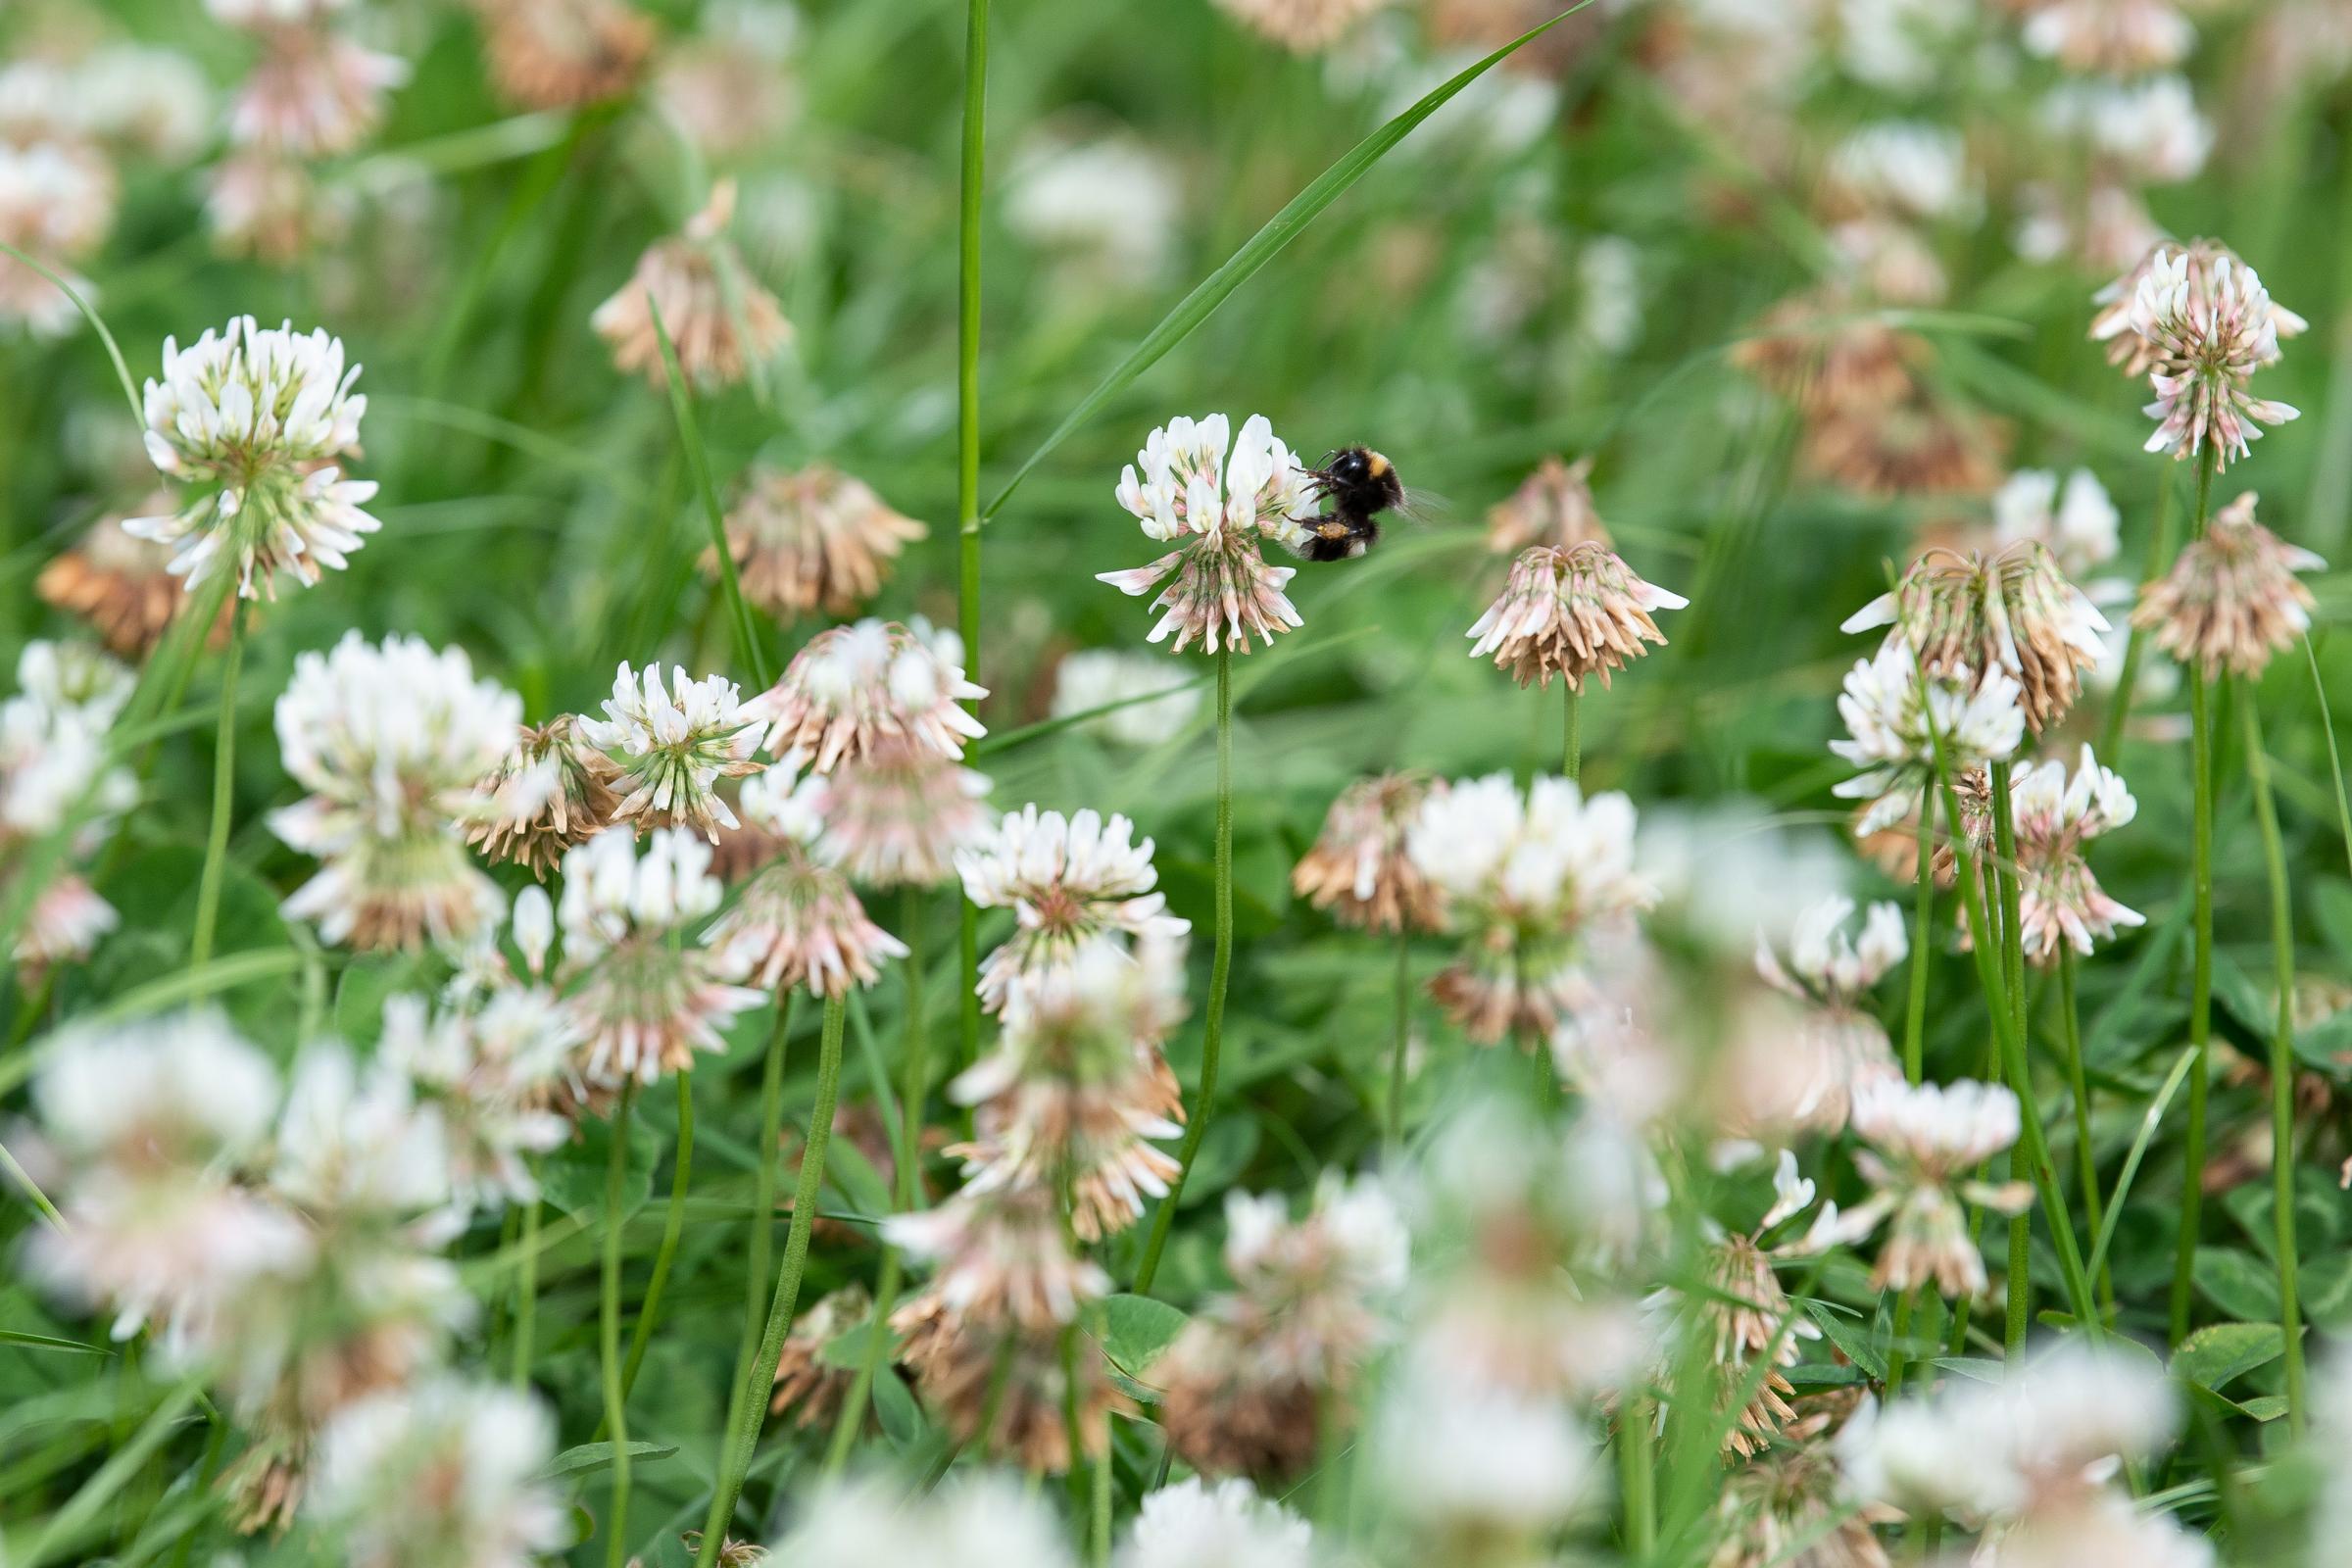 On beginning the organic conversion process they direct drilled about 70 acres of the grazing ground with 2kg to the acre of white clover in a ryegrass mix Ref:RH190721052 Rob Haining / The Scottish Farmer...